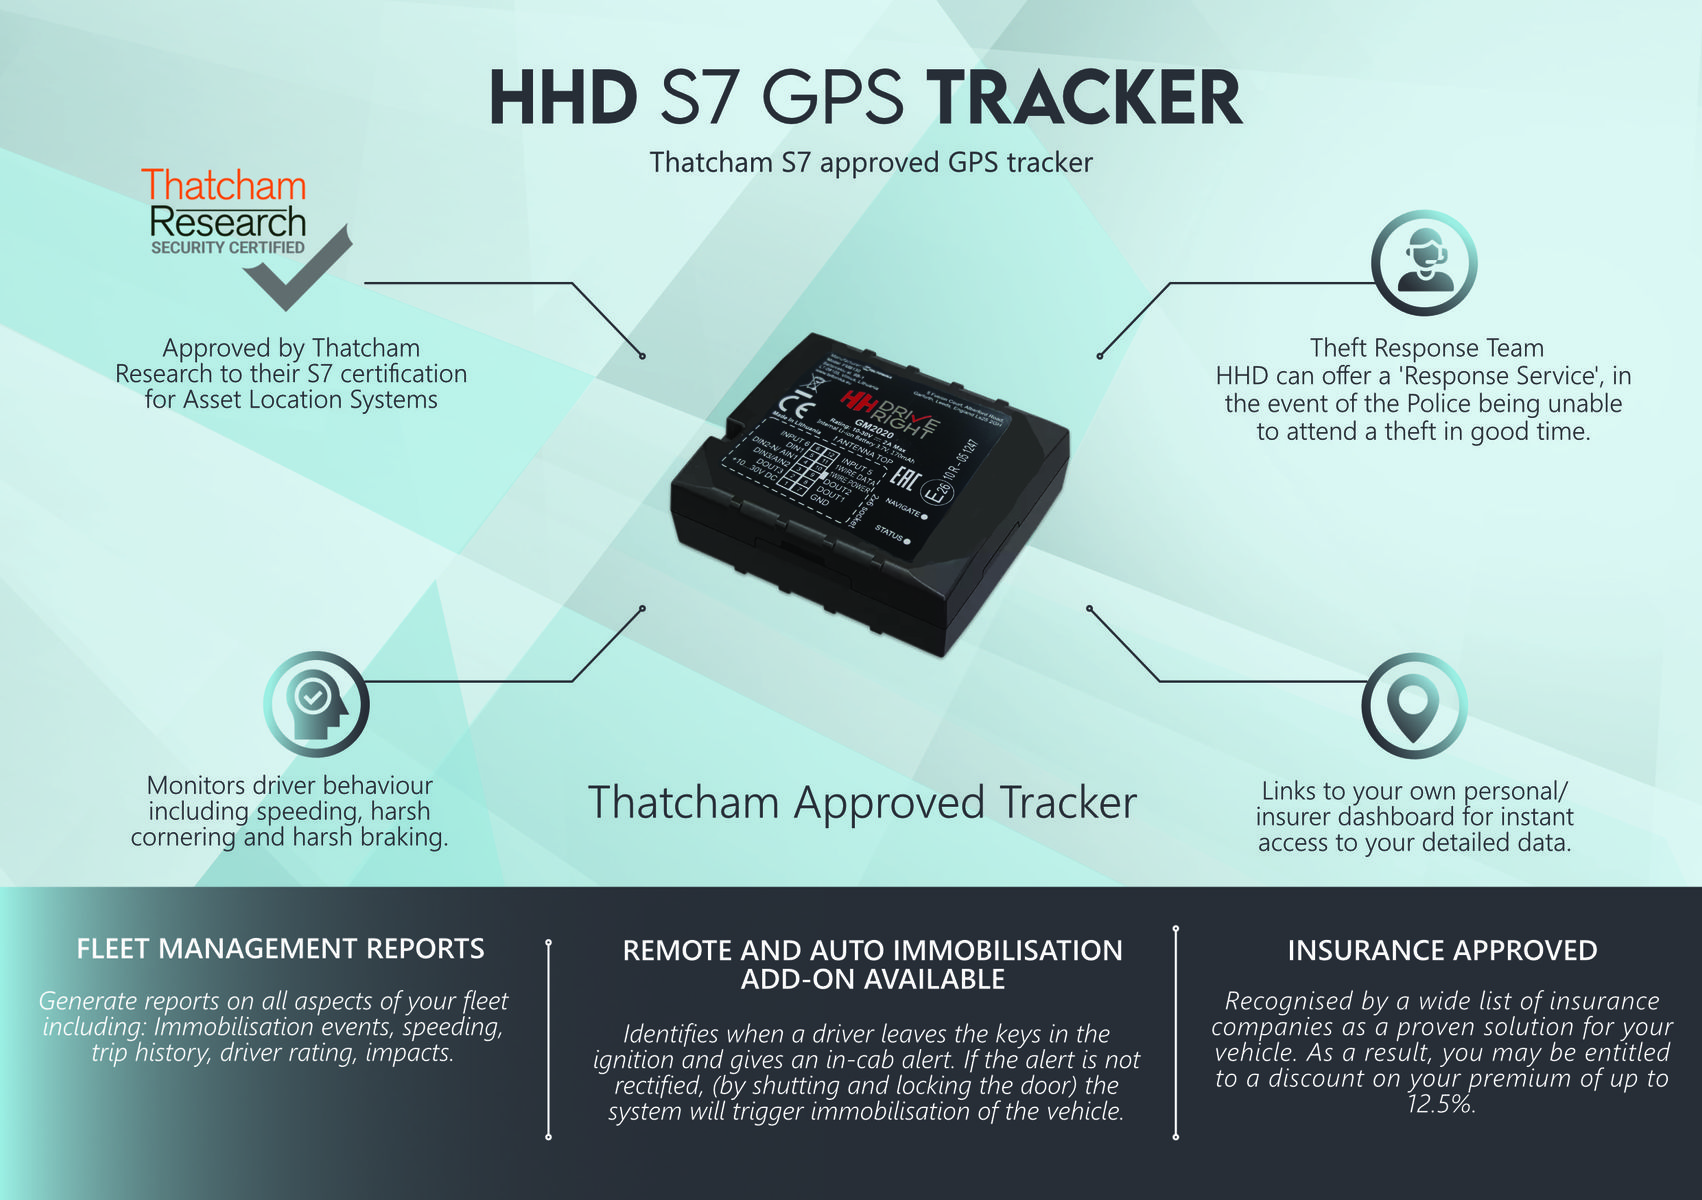 Product detail sheet for the new, Thatcham-approved HHD S7 GPS Tracker.